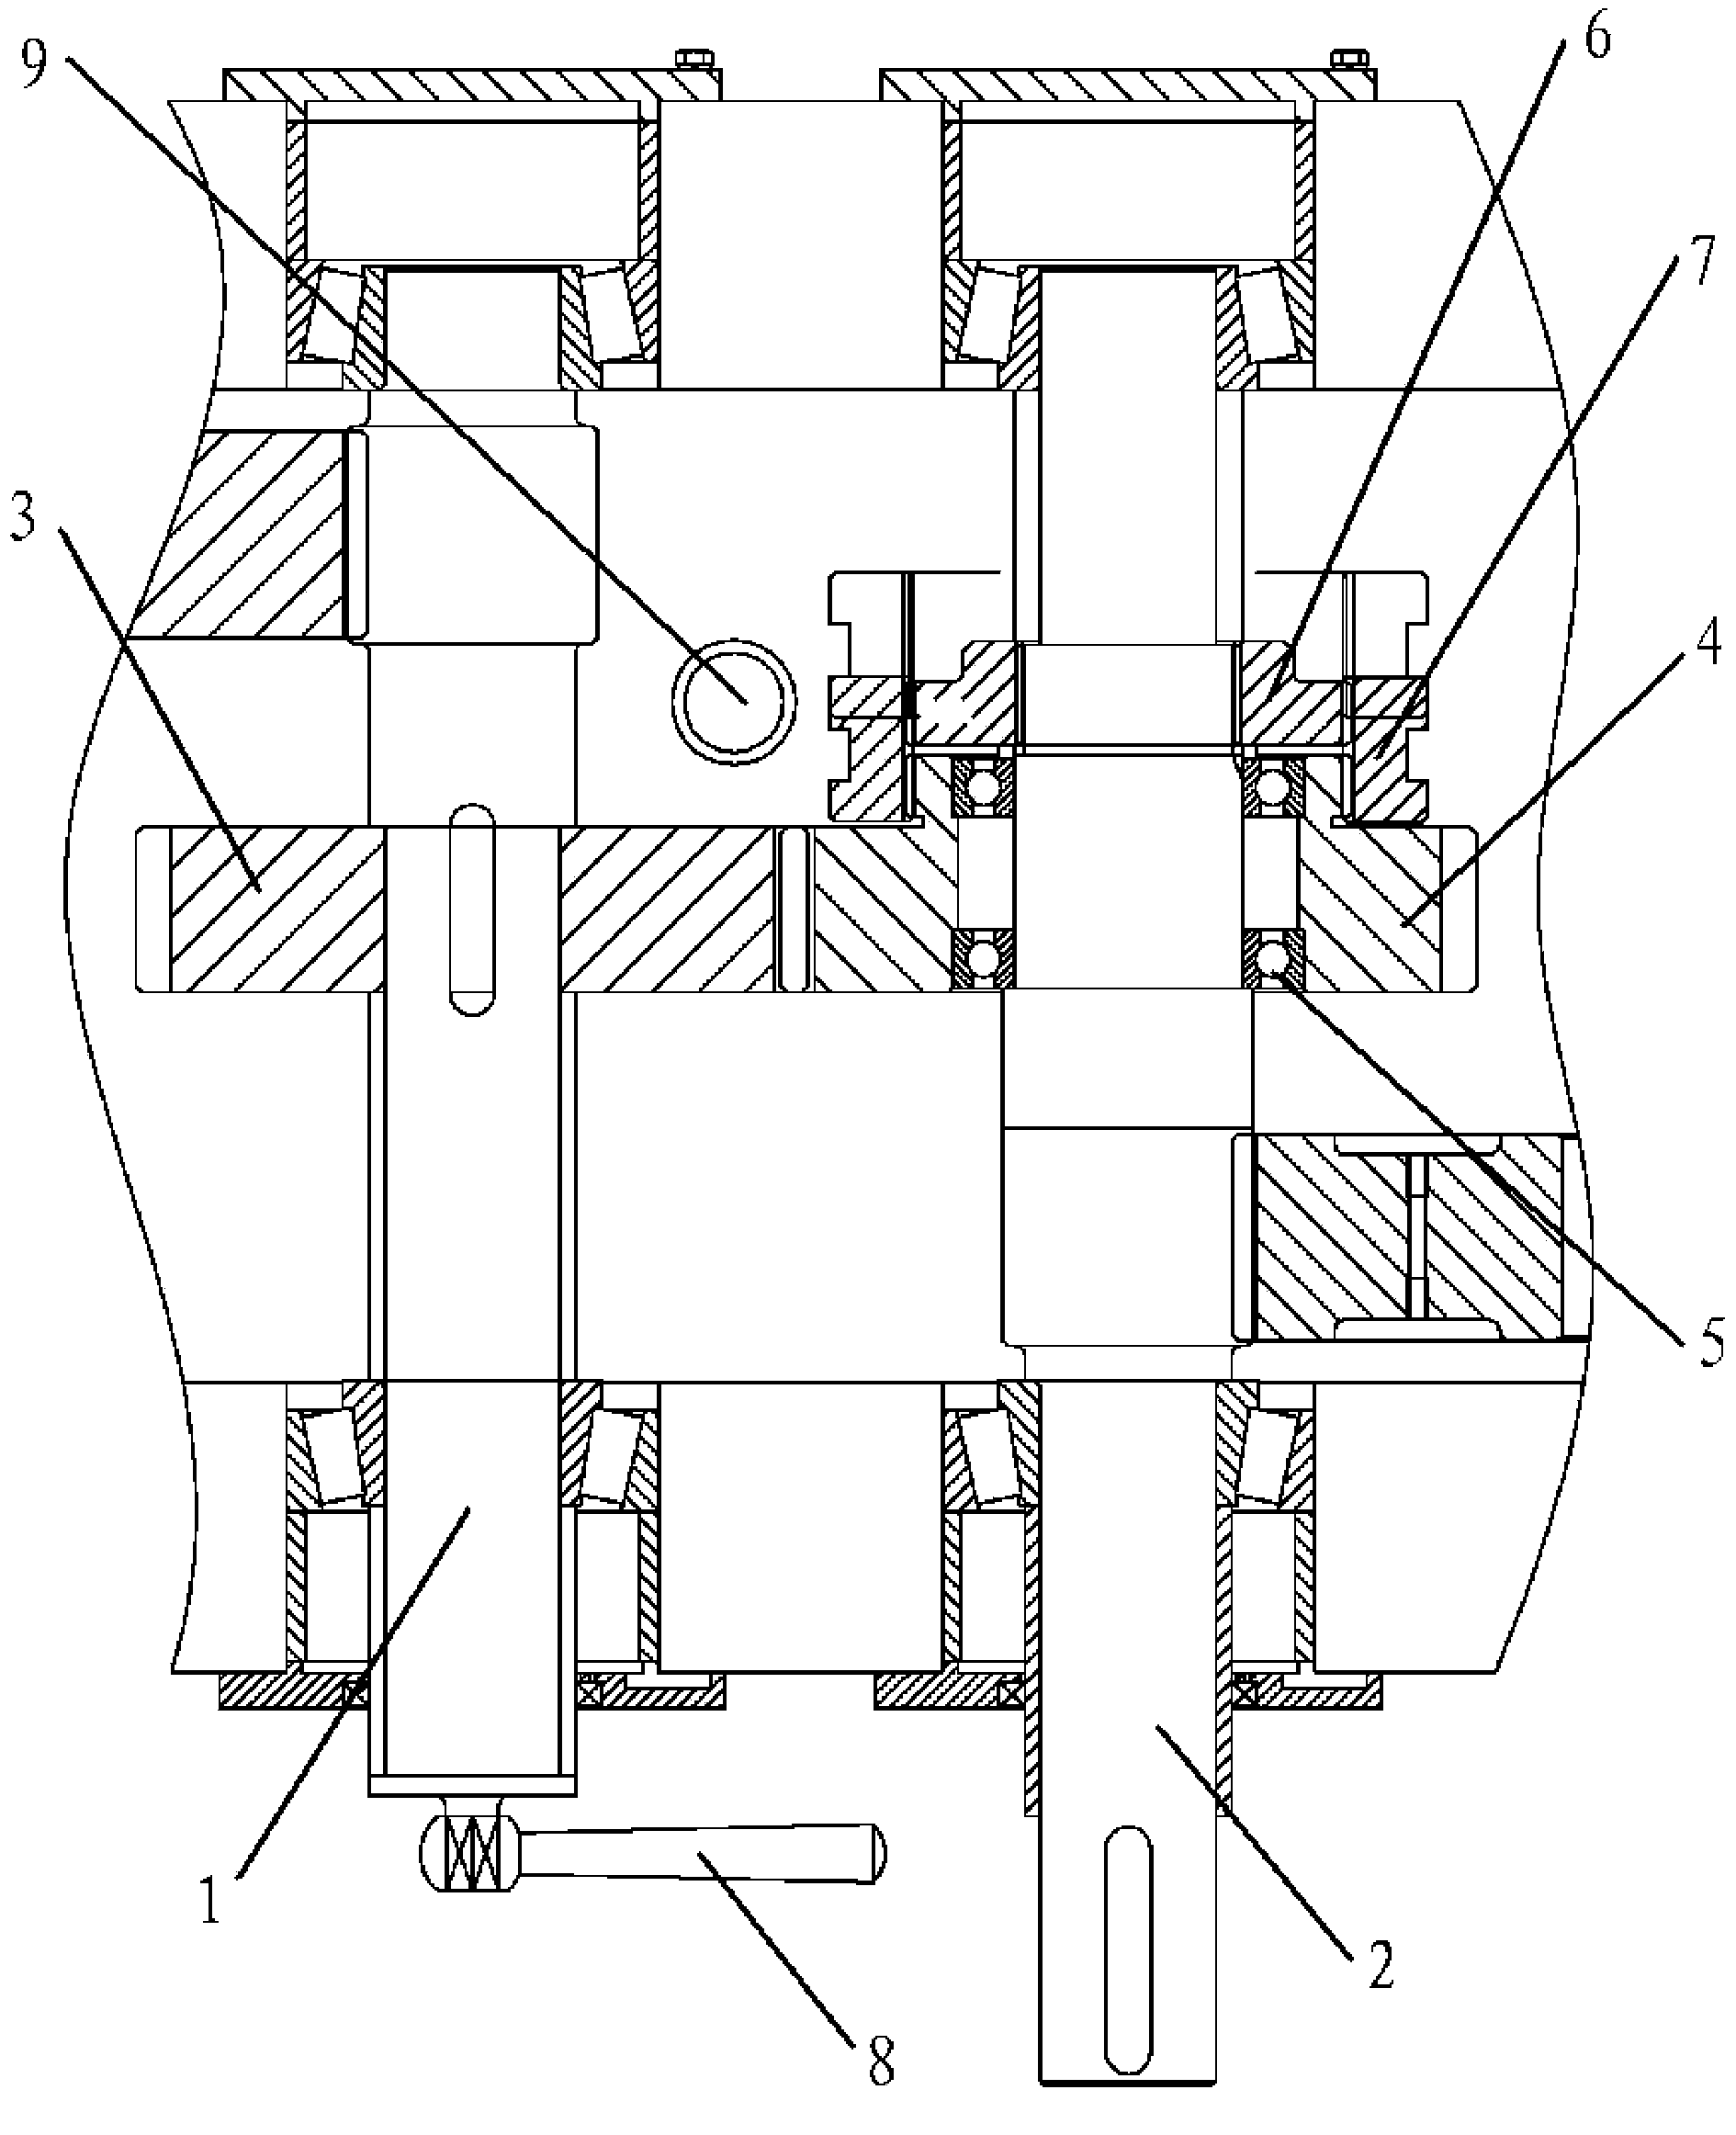 Transmission chain coupling mechanism with adjustable phase